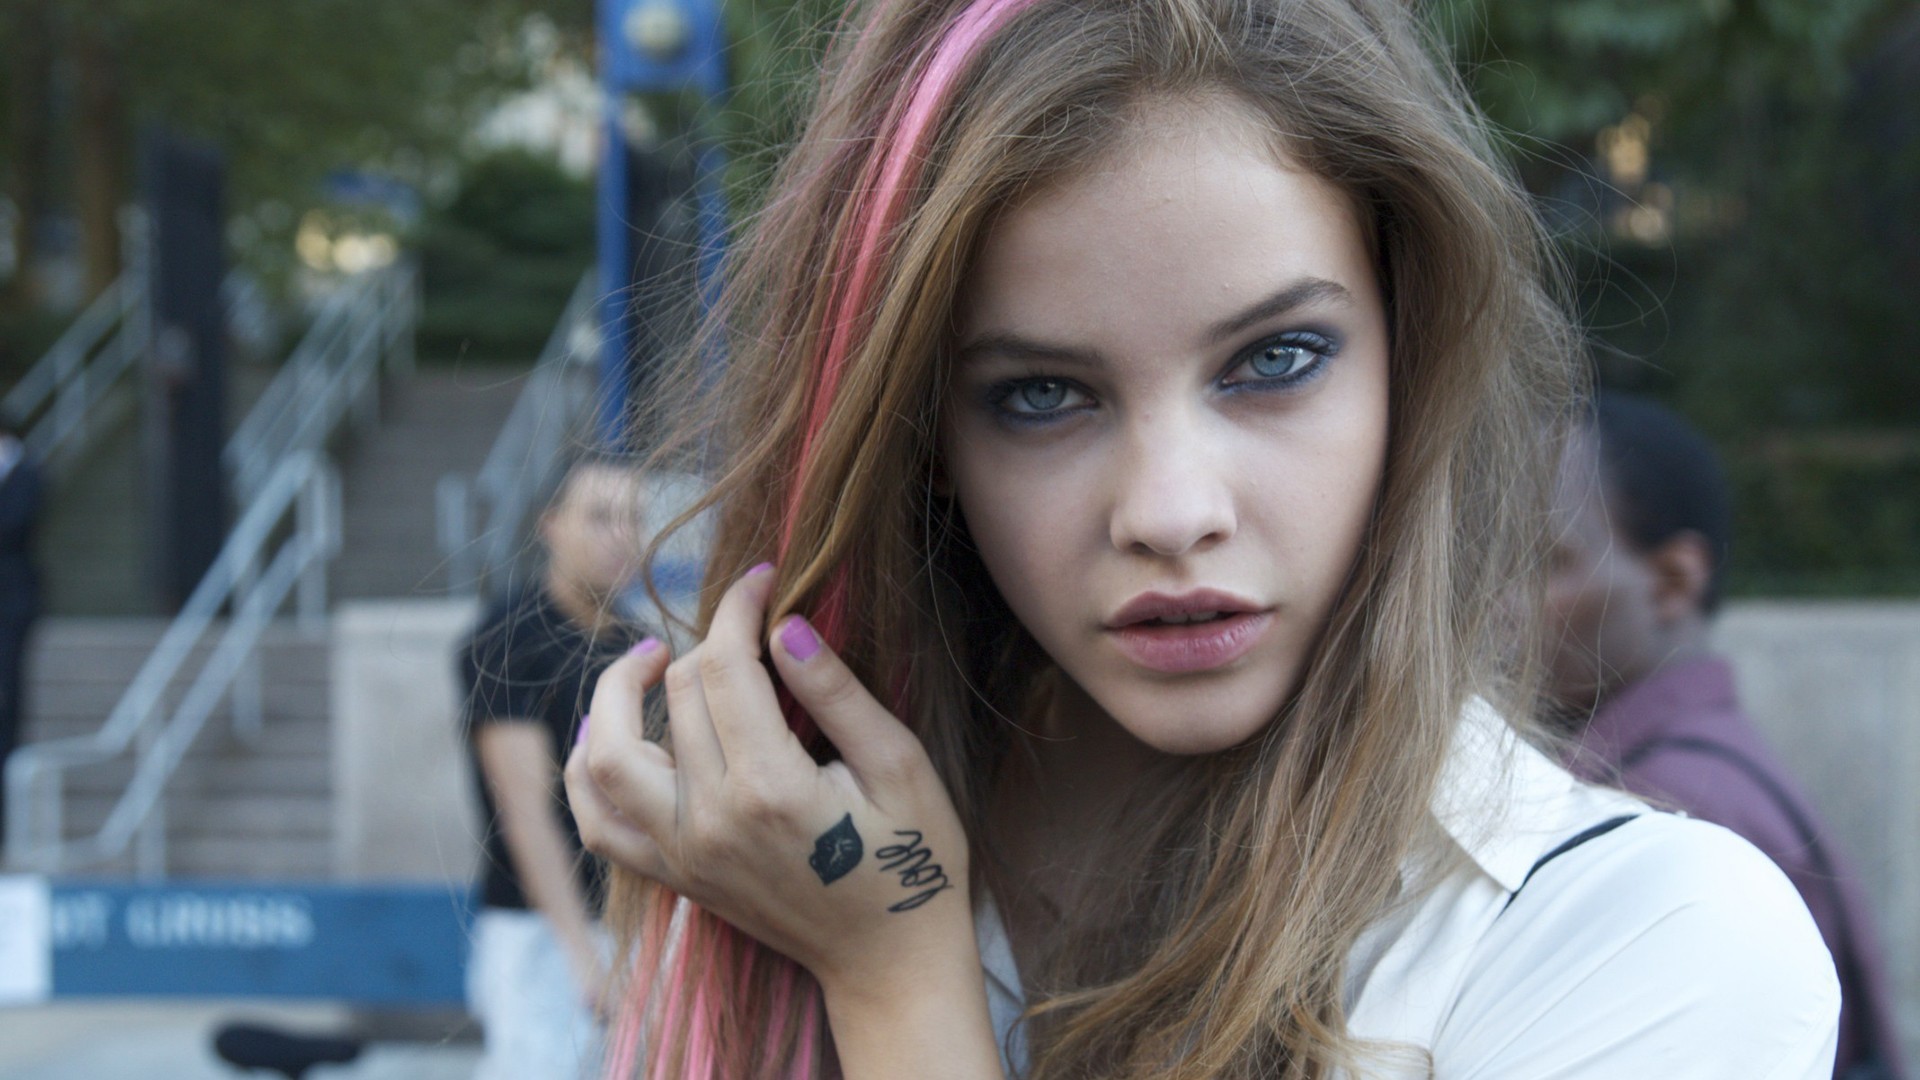 People 1920x1080 Barbara Palvin women portrait tattoo dyed hair face model women outdoors painted nails urban looking at viewer outdoors